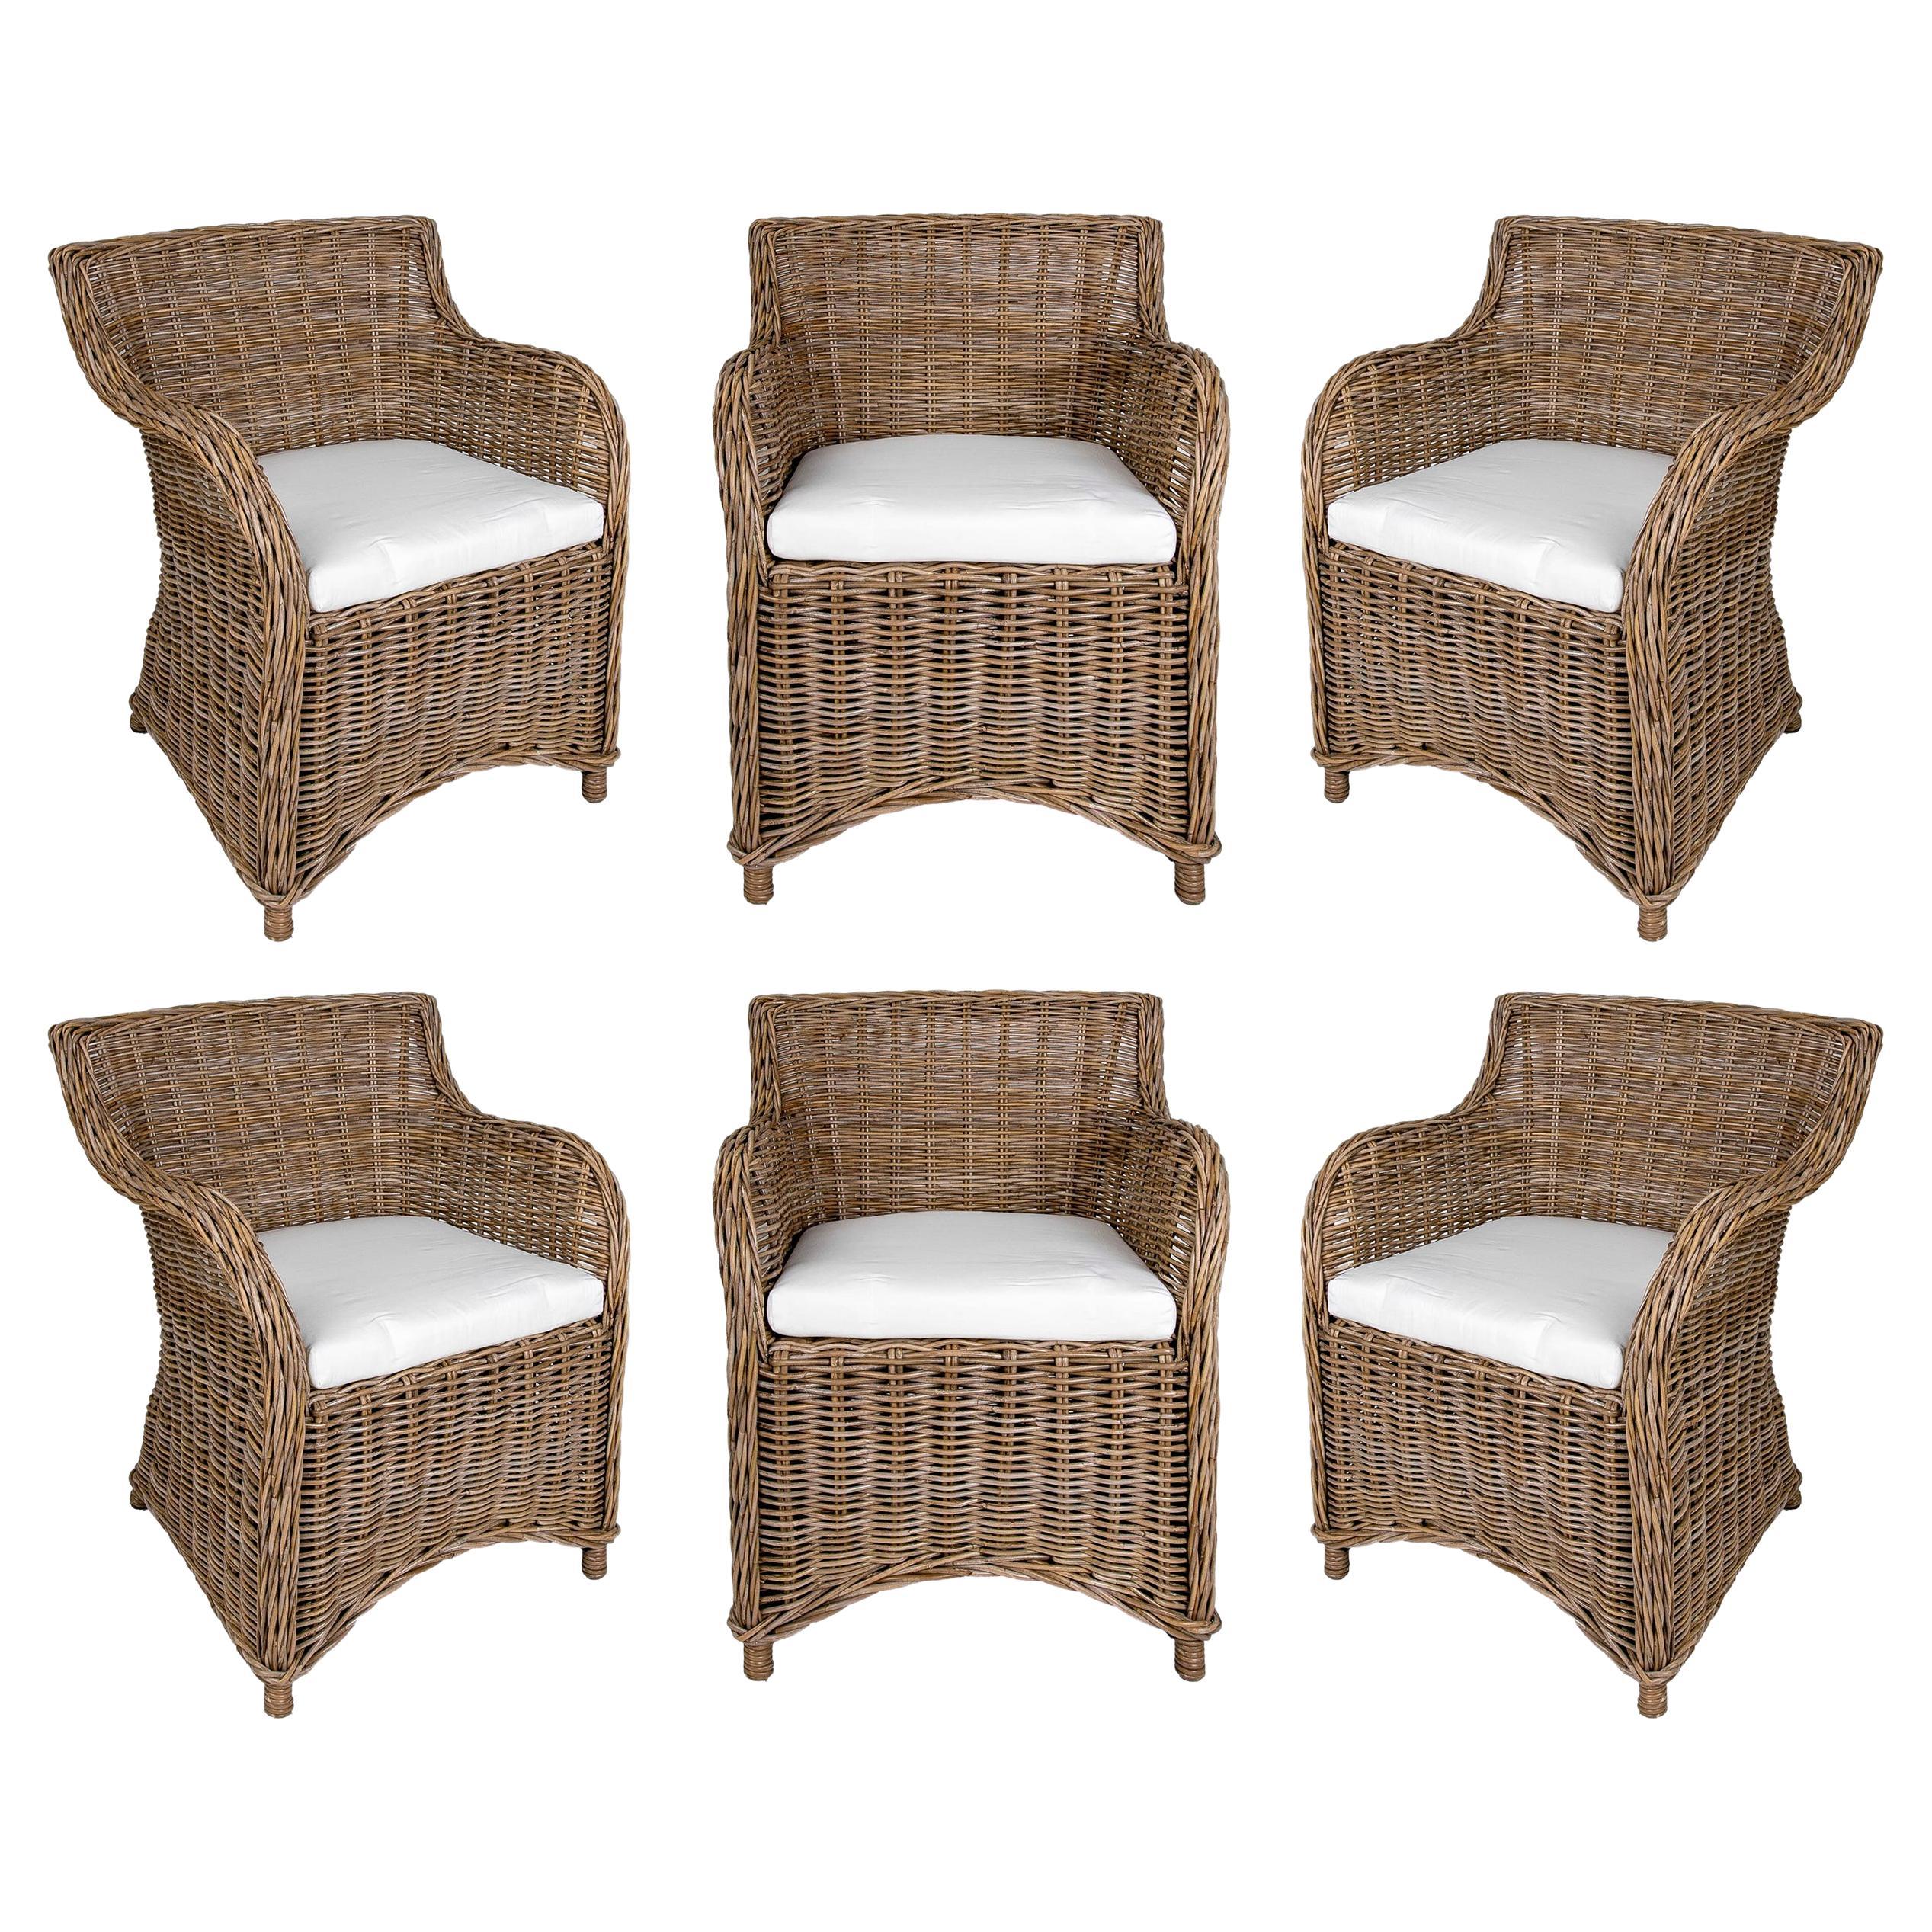 Set of Rattan Garden Chairs with Cushions in Greyish Tone For Sale